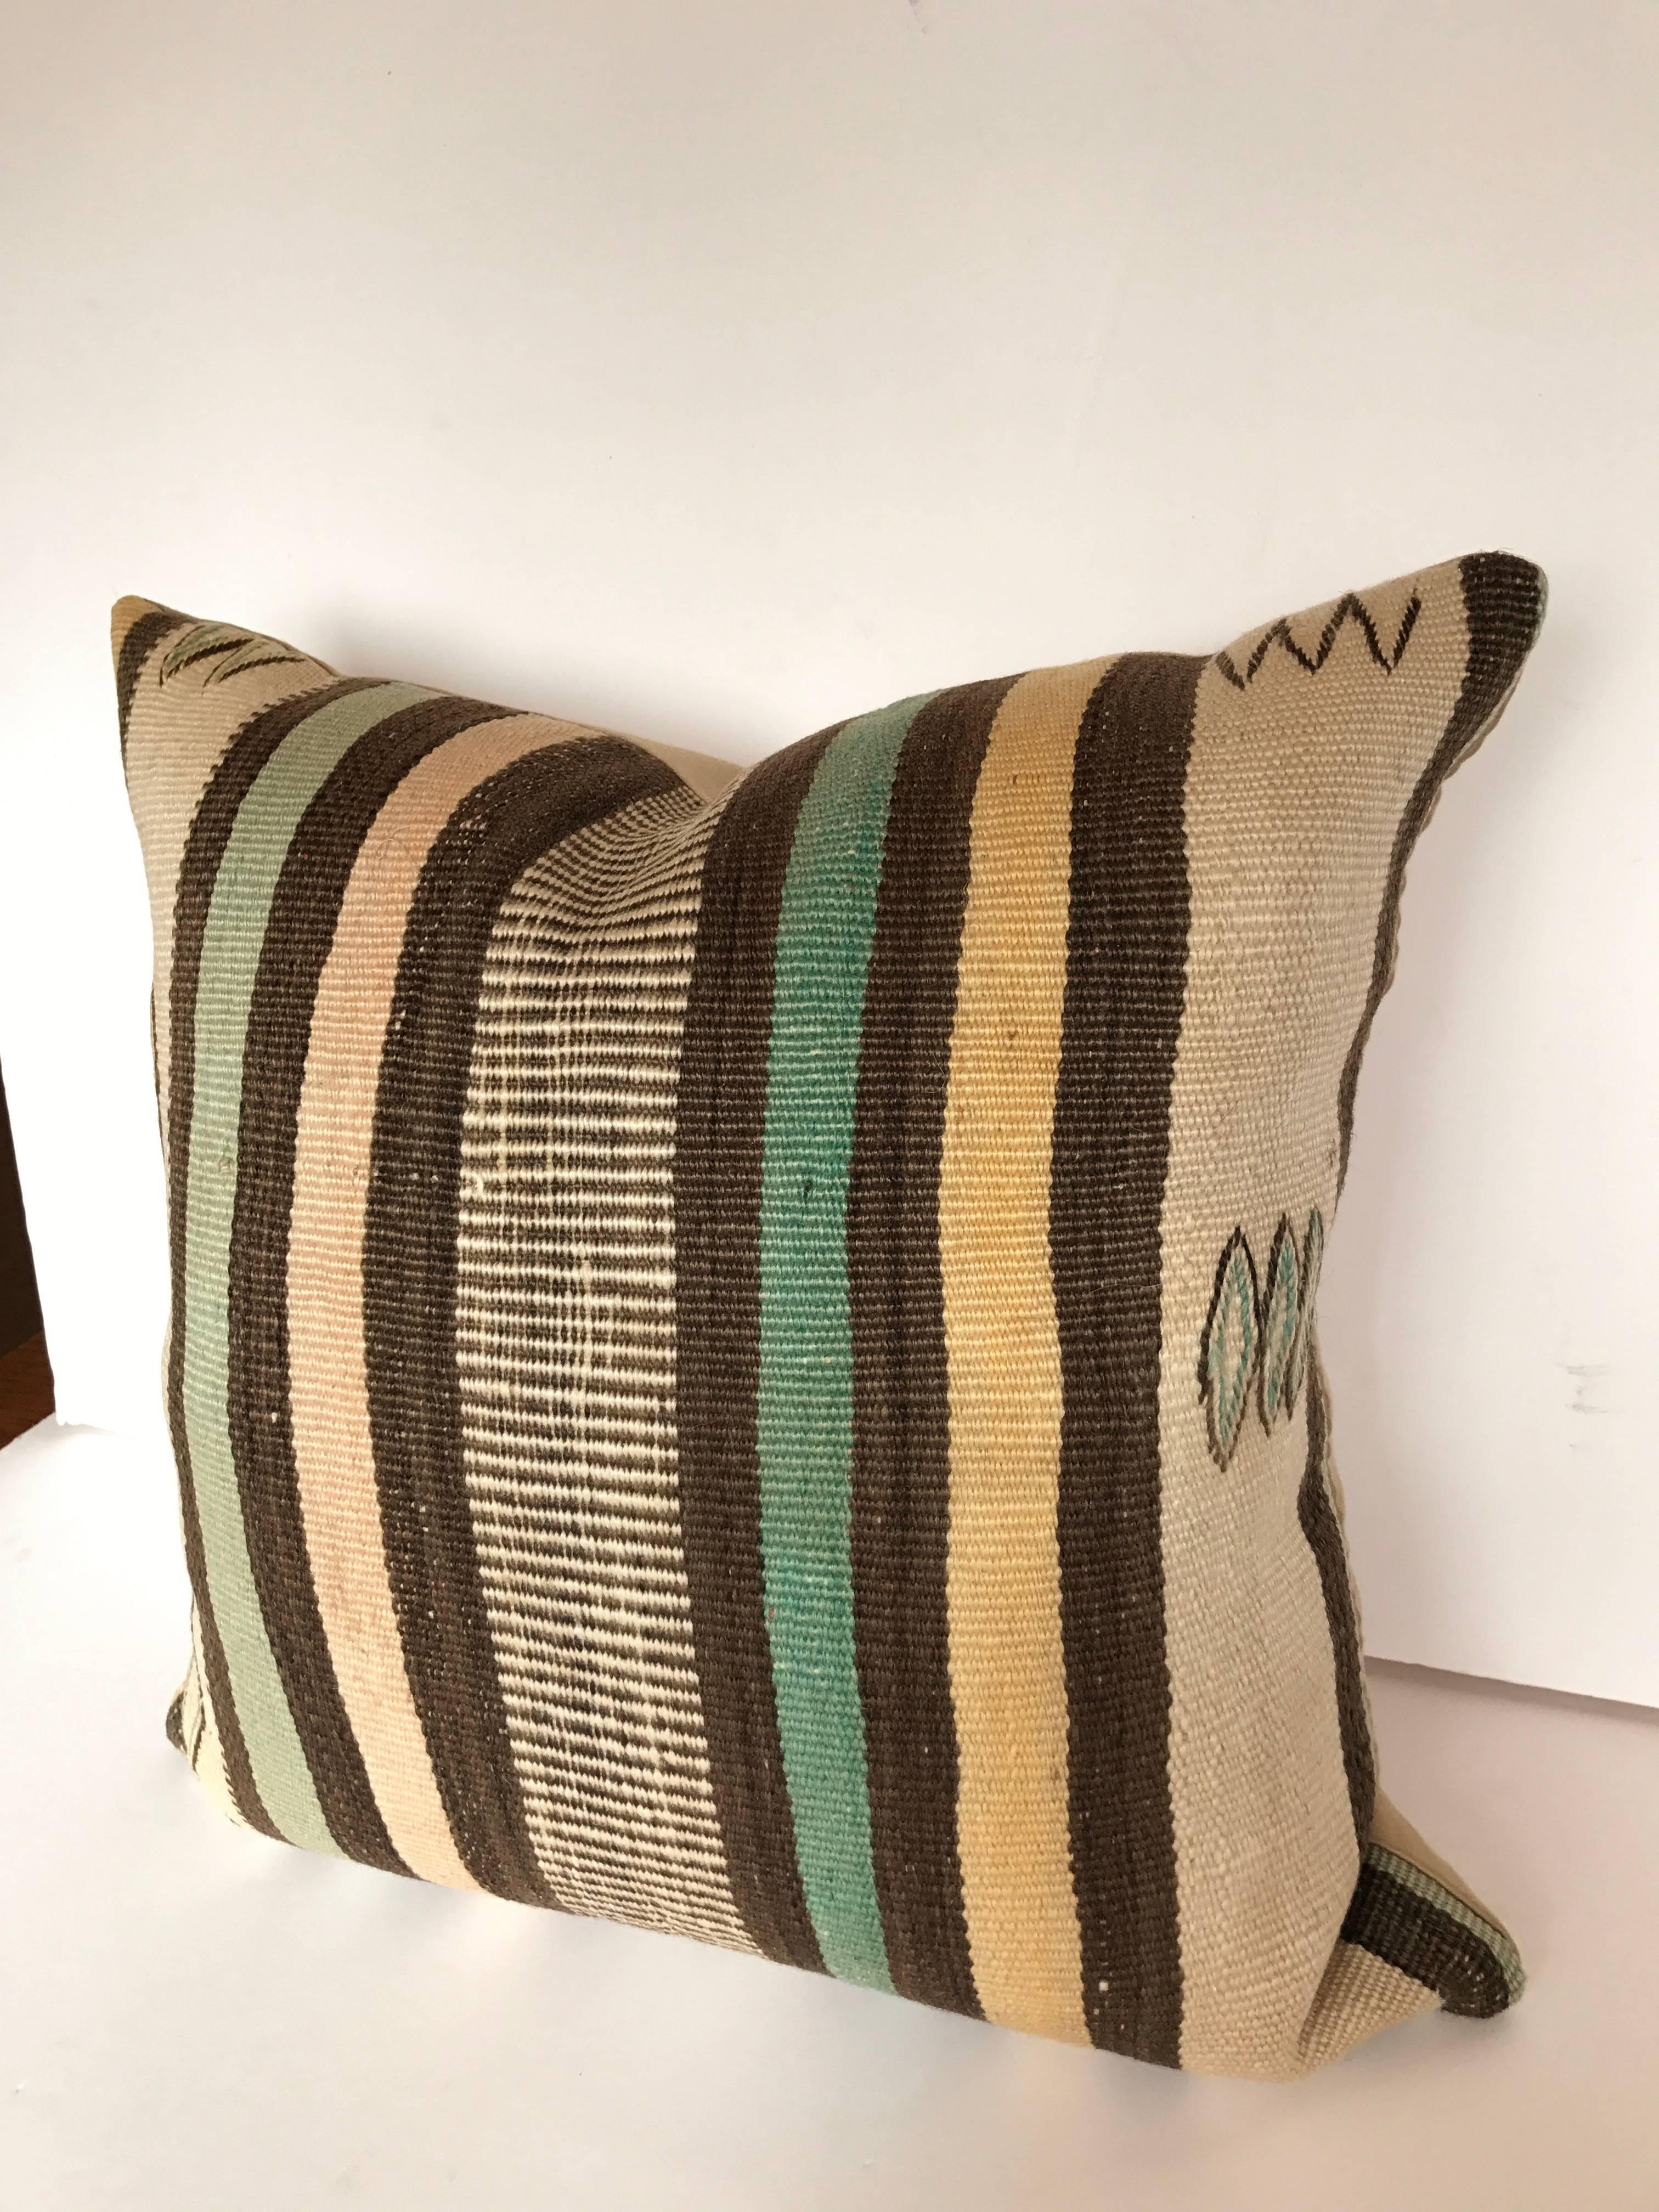 Custom pillow cut from a vintage hand-loomed wool Moroccan Rug from the Atlas Mountains. Wool is soft with good color. Pillow is backed in linen/wool blend, filled with an insert of 50/50 down and feathers and hand sewn closed. 